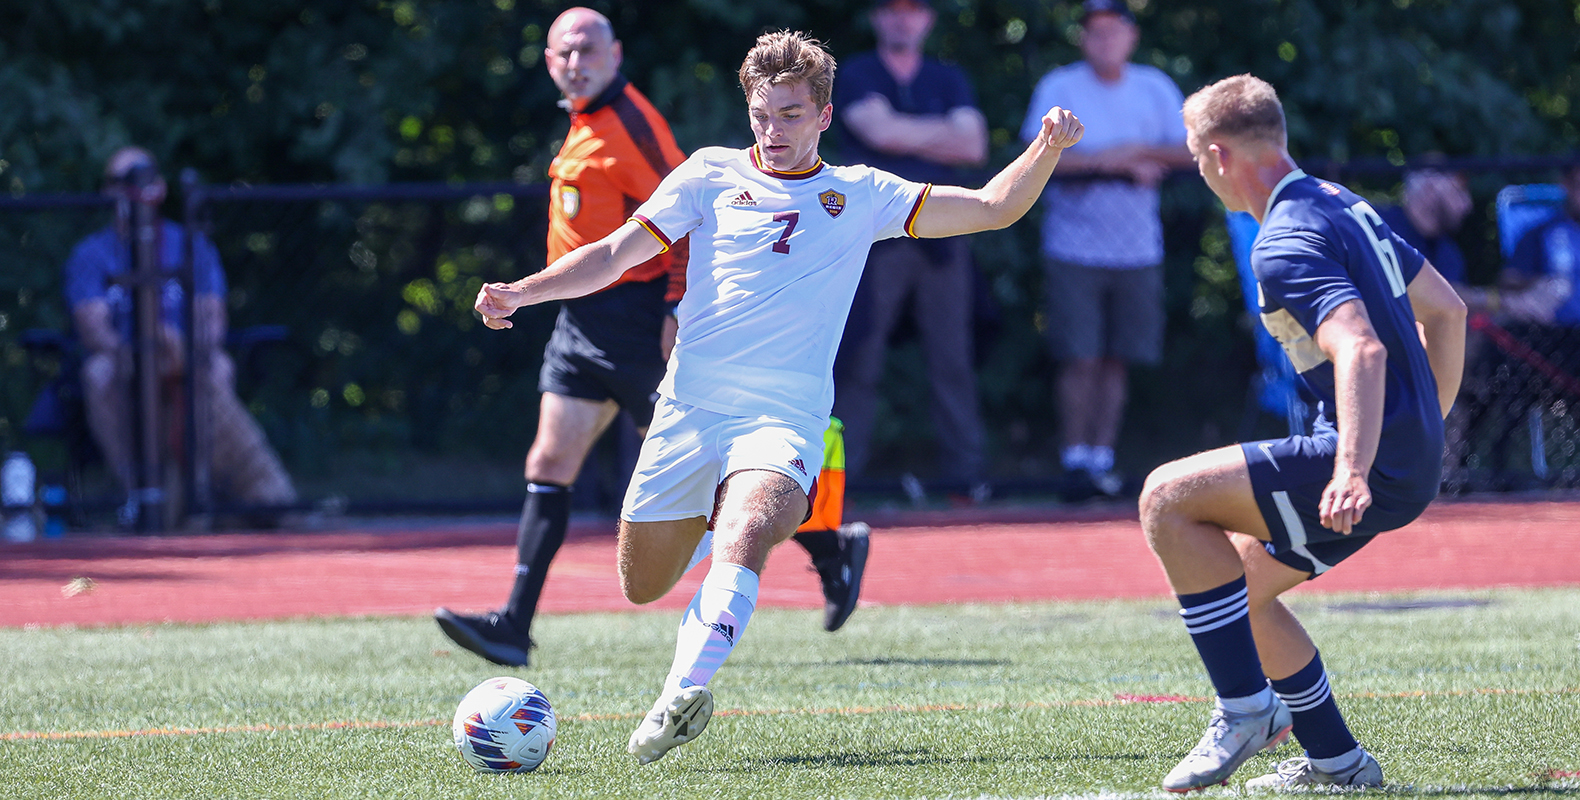 Pride Falls to Monks in GNAC Contest, 3-1